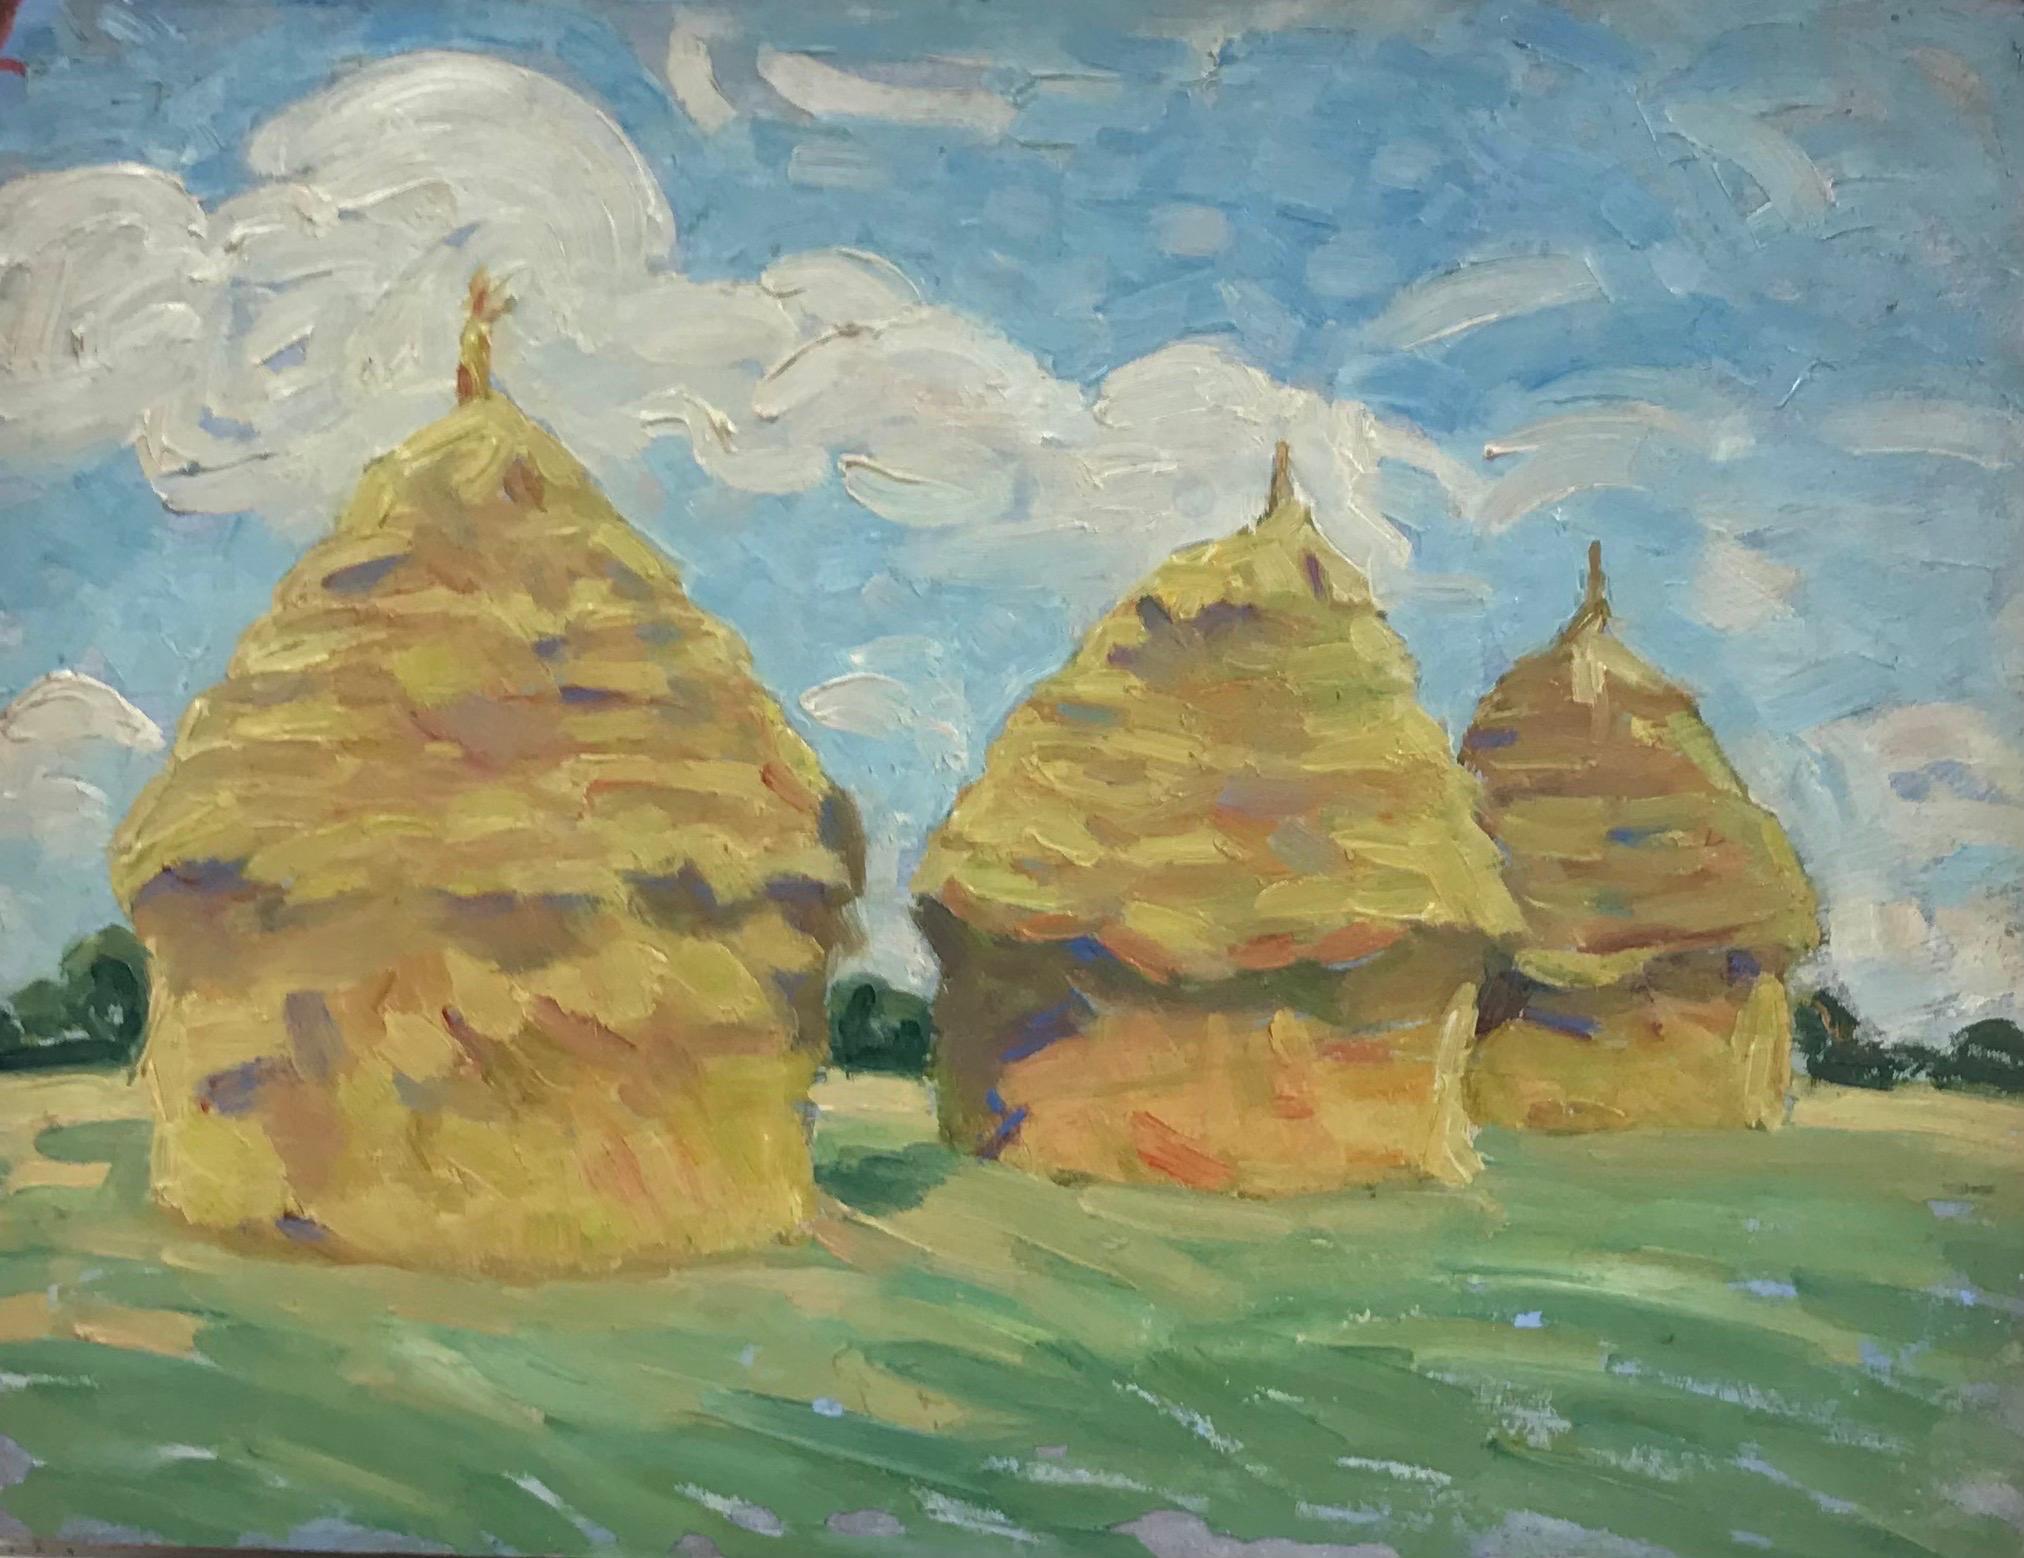 Suzanne Crochet Landscape Painting - Haystacks in Field, 1930's French Impressionist Oil Painting 